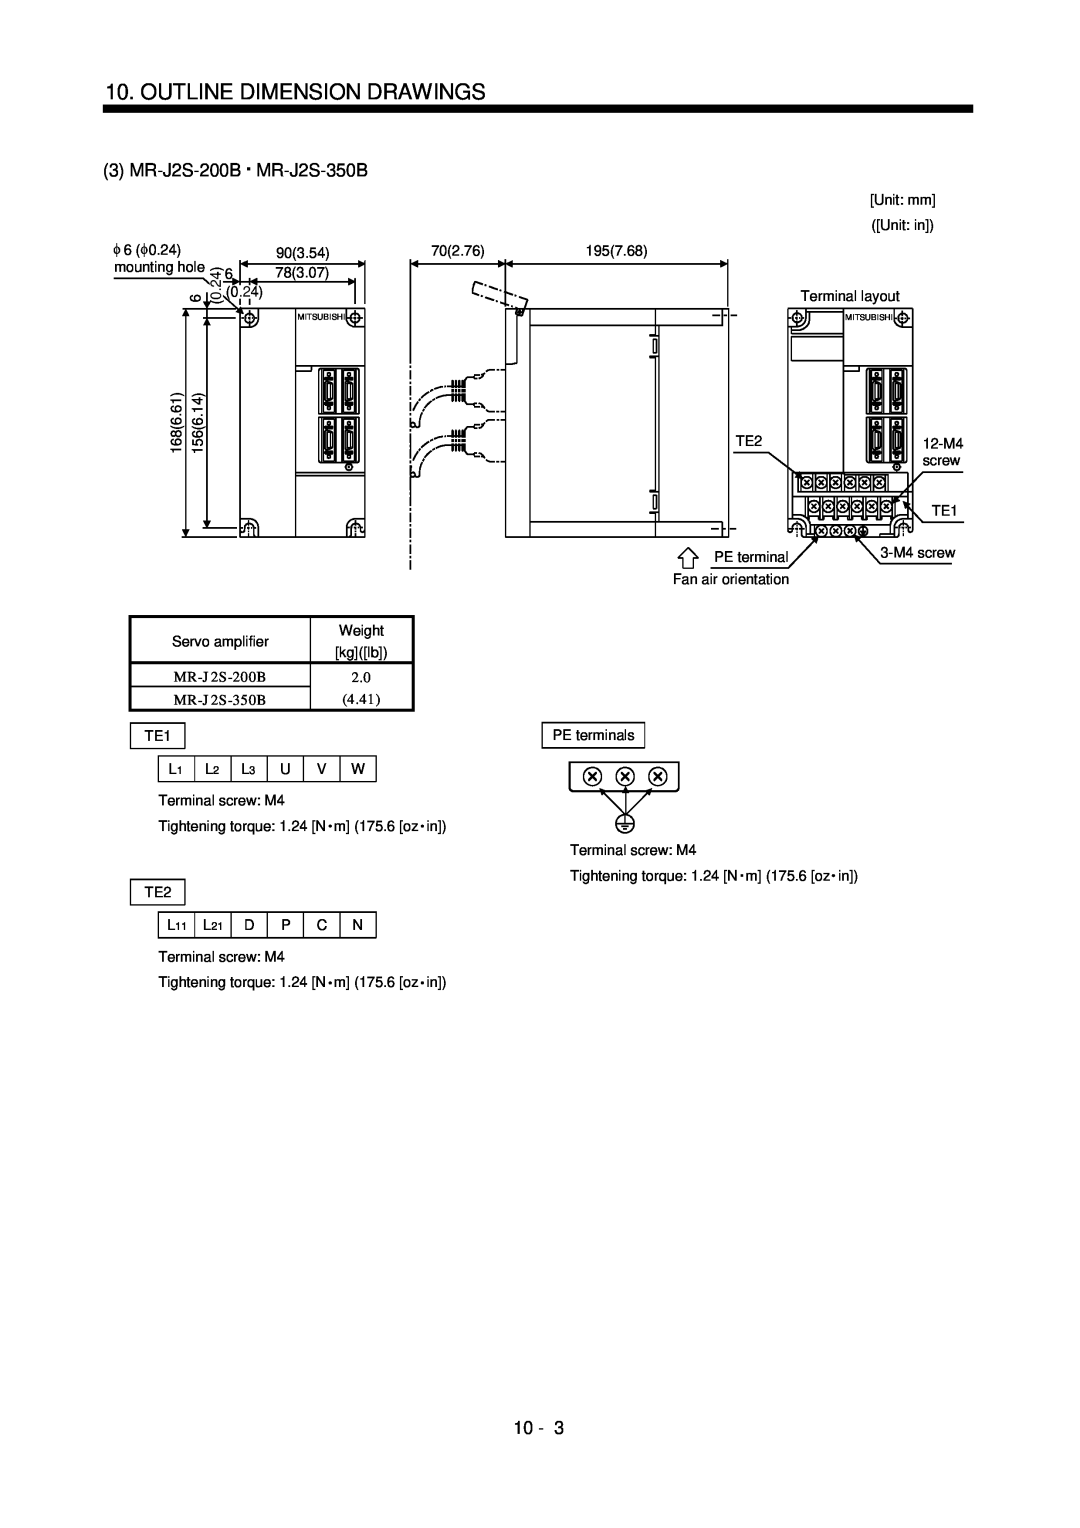 Bose MR-J2S- B instruction manual 3MR-J2S-200B MR-J2S-350B, Outline Dimension Drawings, 10 